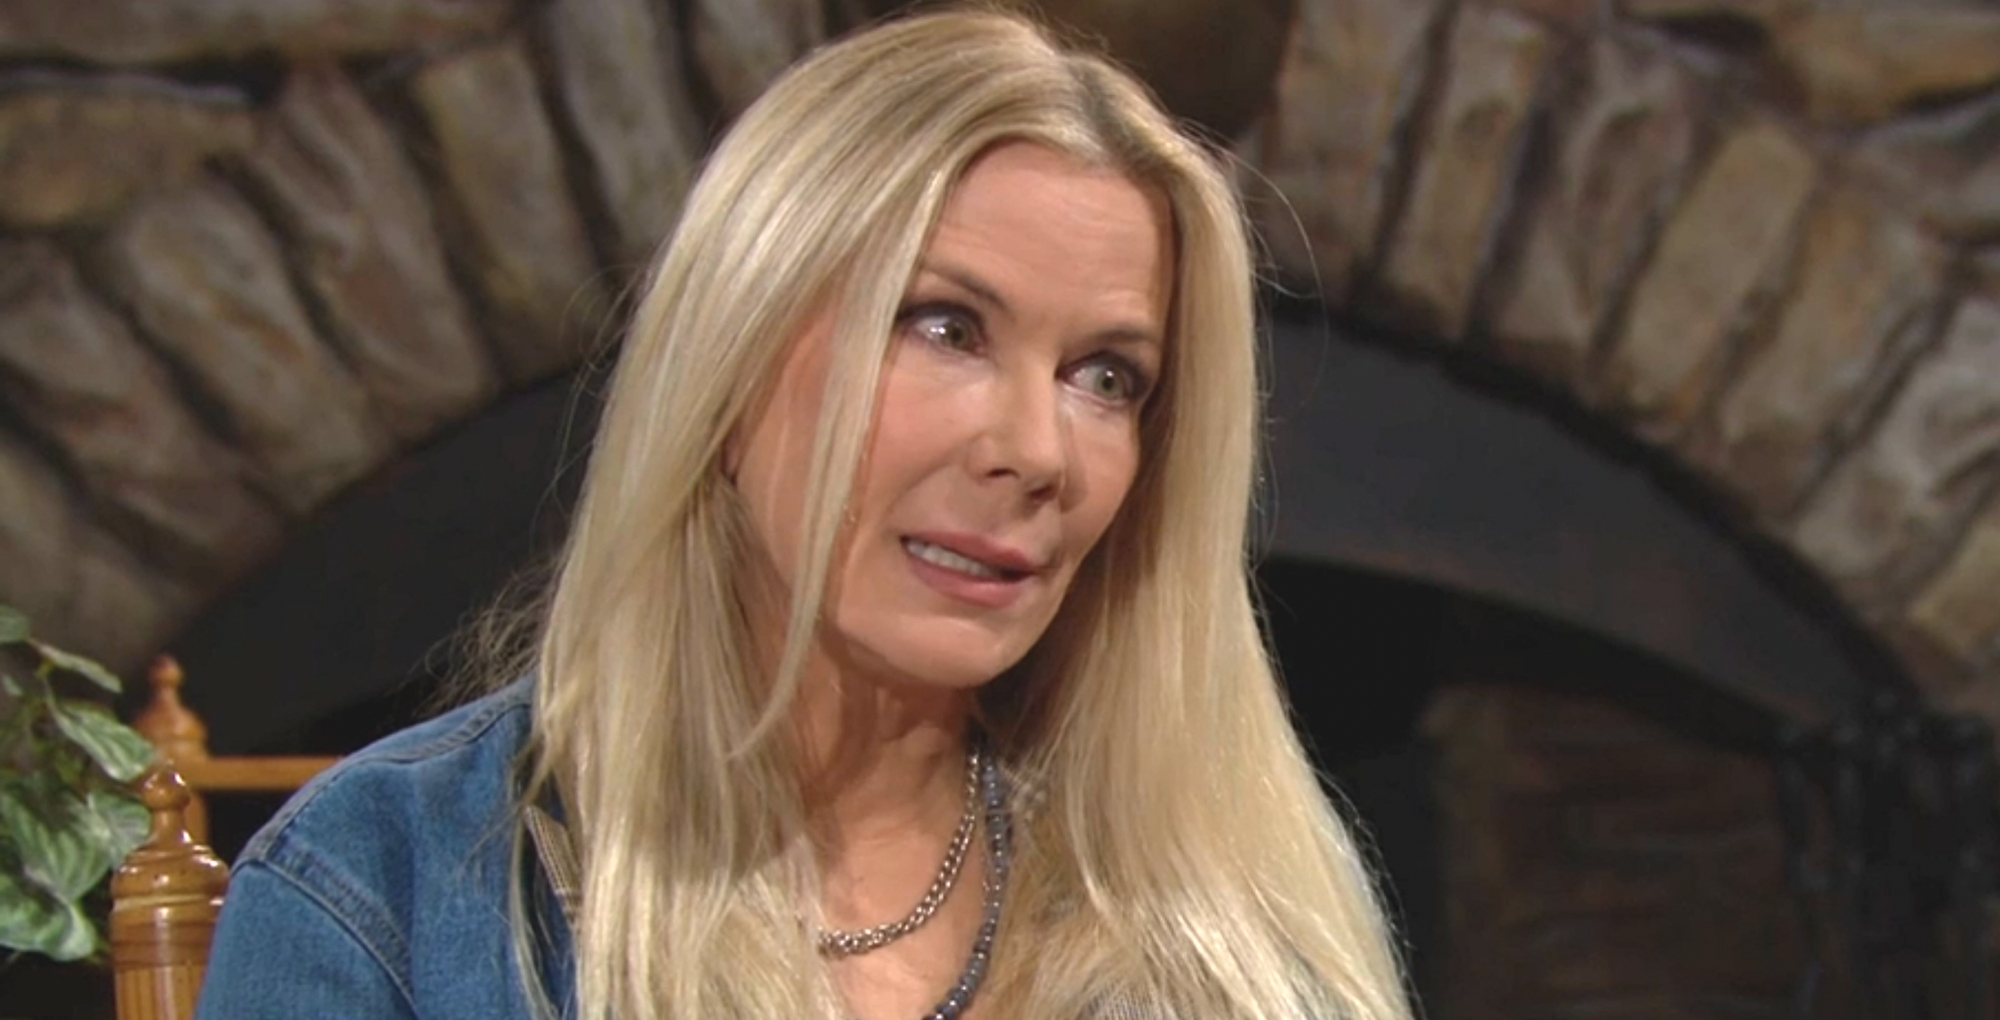 bold and the beautiful recap for monday, february 6, 2023 brooke logan begs katie for a little understanding...for taylor